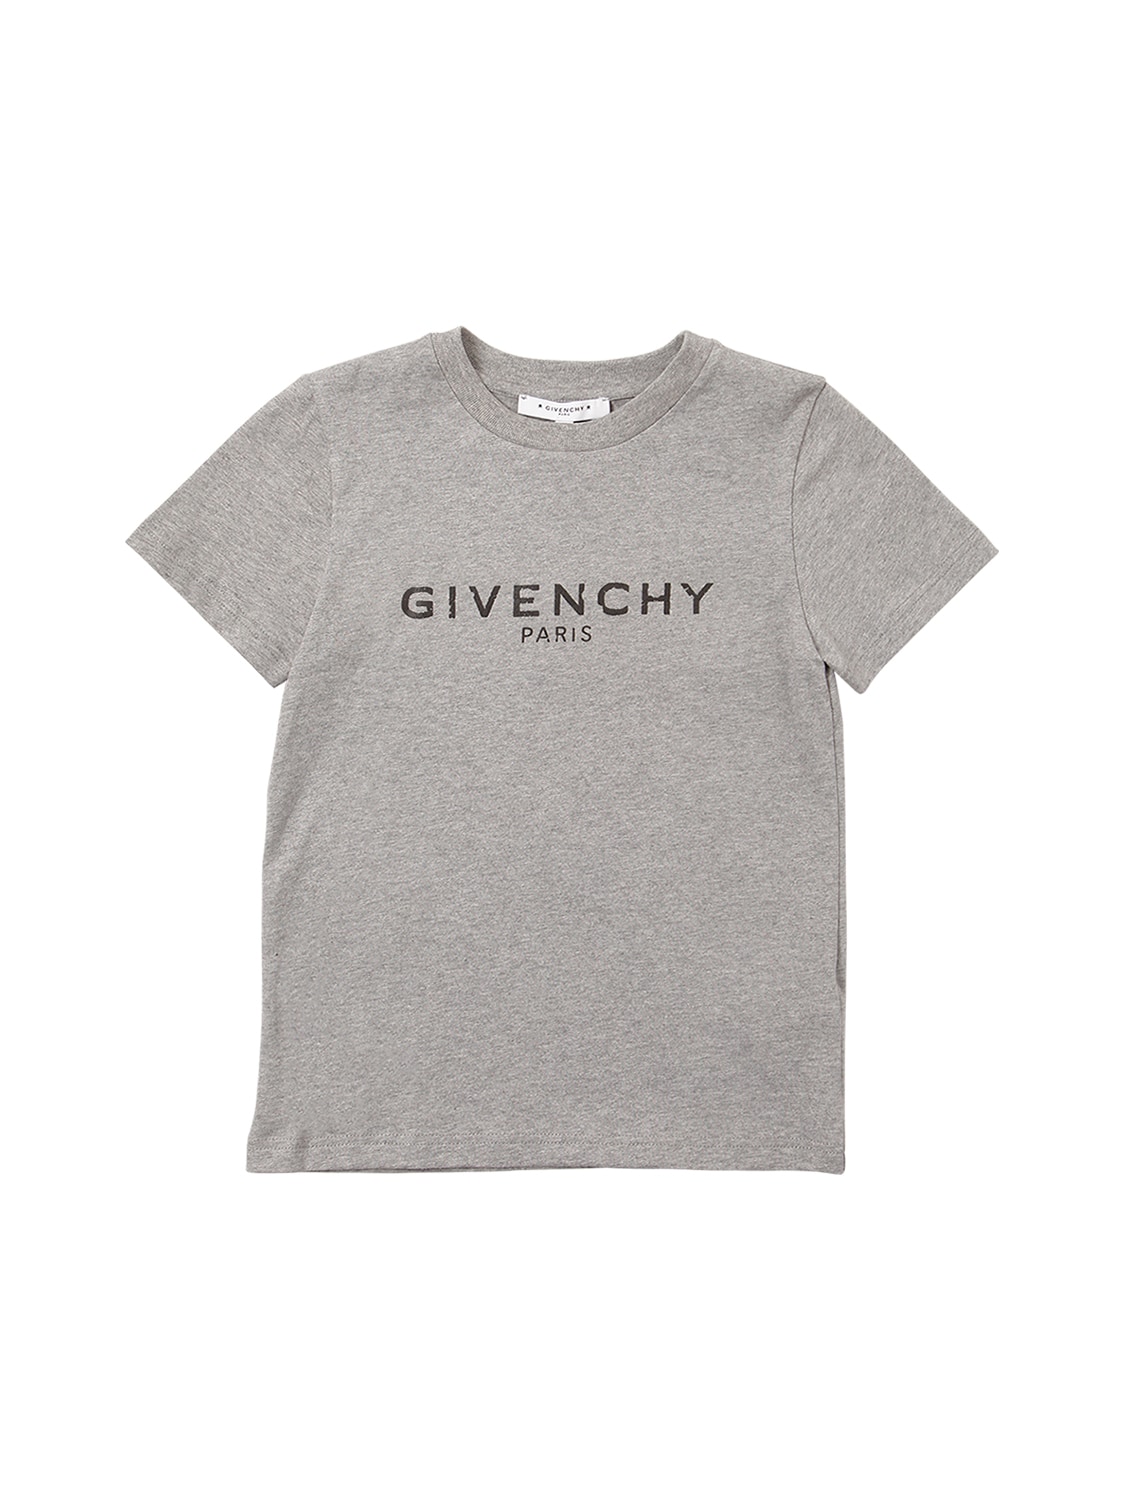 Givenchy Kids' Logo Printed Cotton Jersey T-shirt In Grey